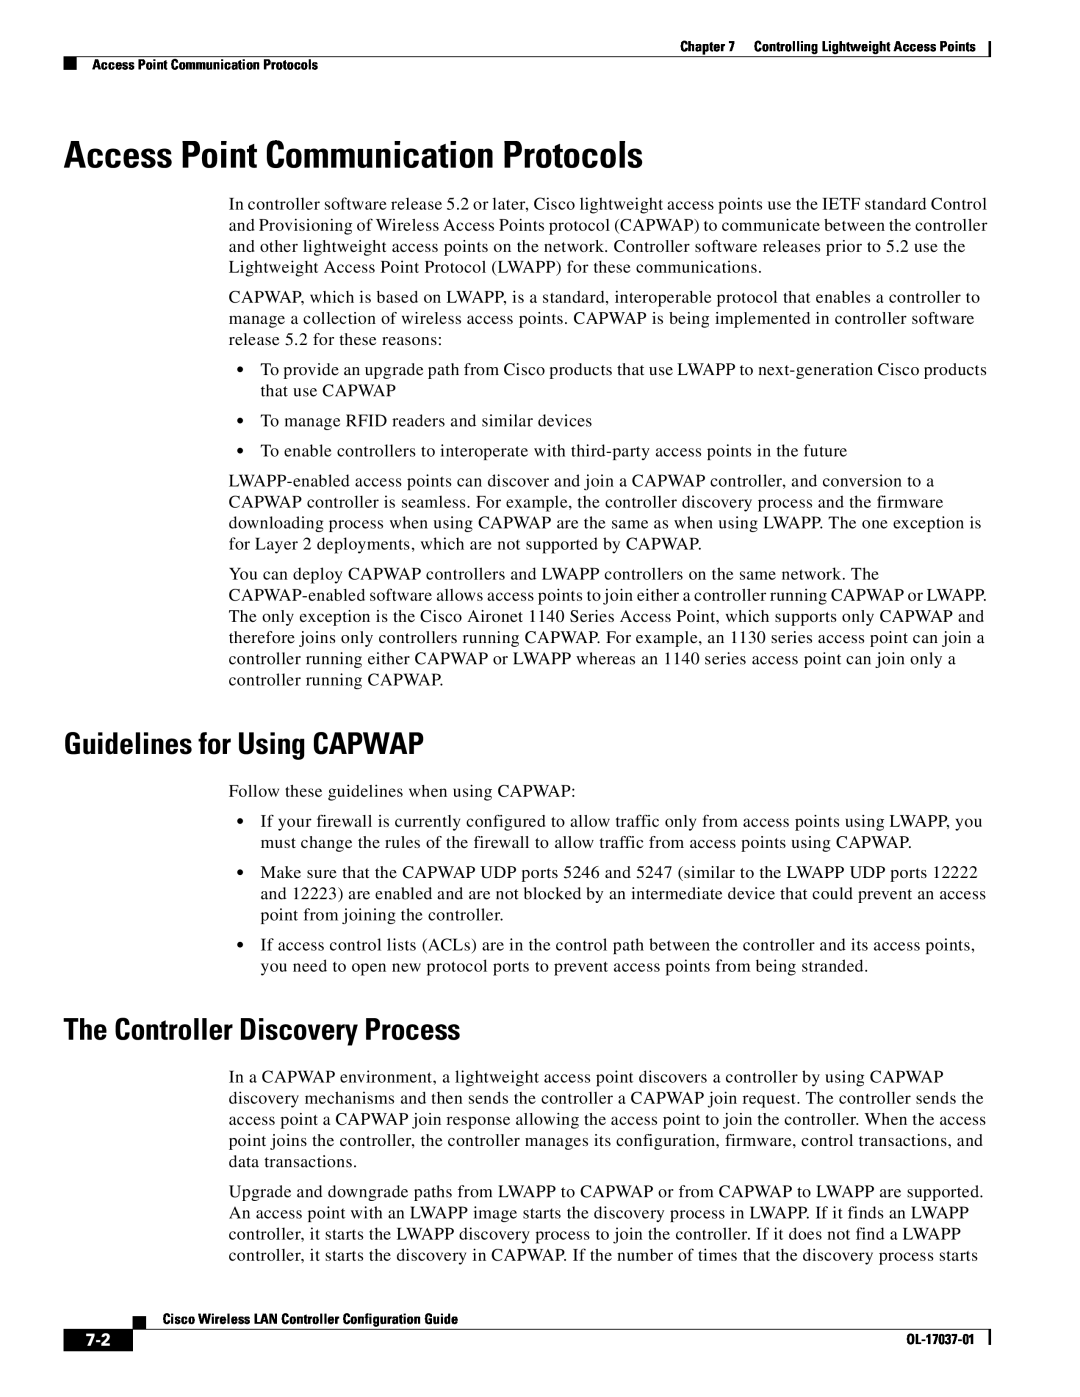 Cisco Systems OL-17037-01 manual Access Point Communication Protocols, Guidelines for Using CAPWAP 